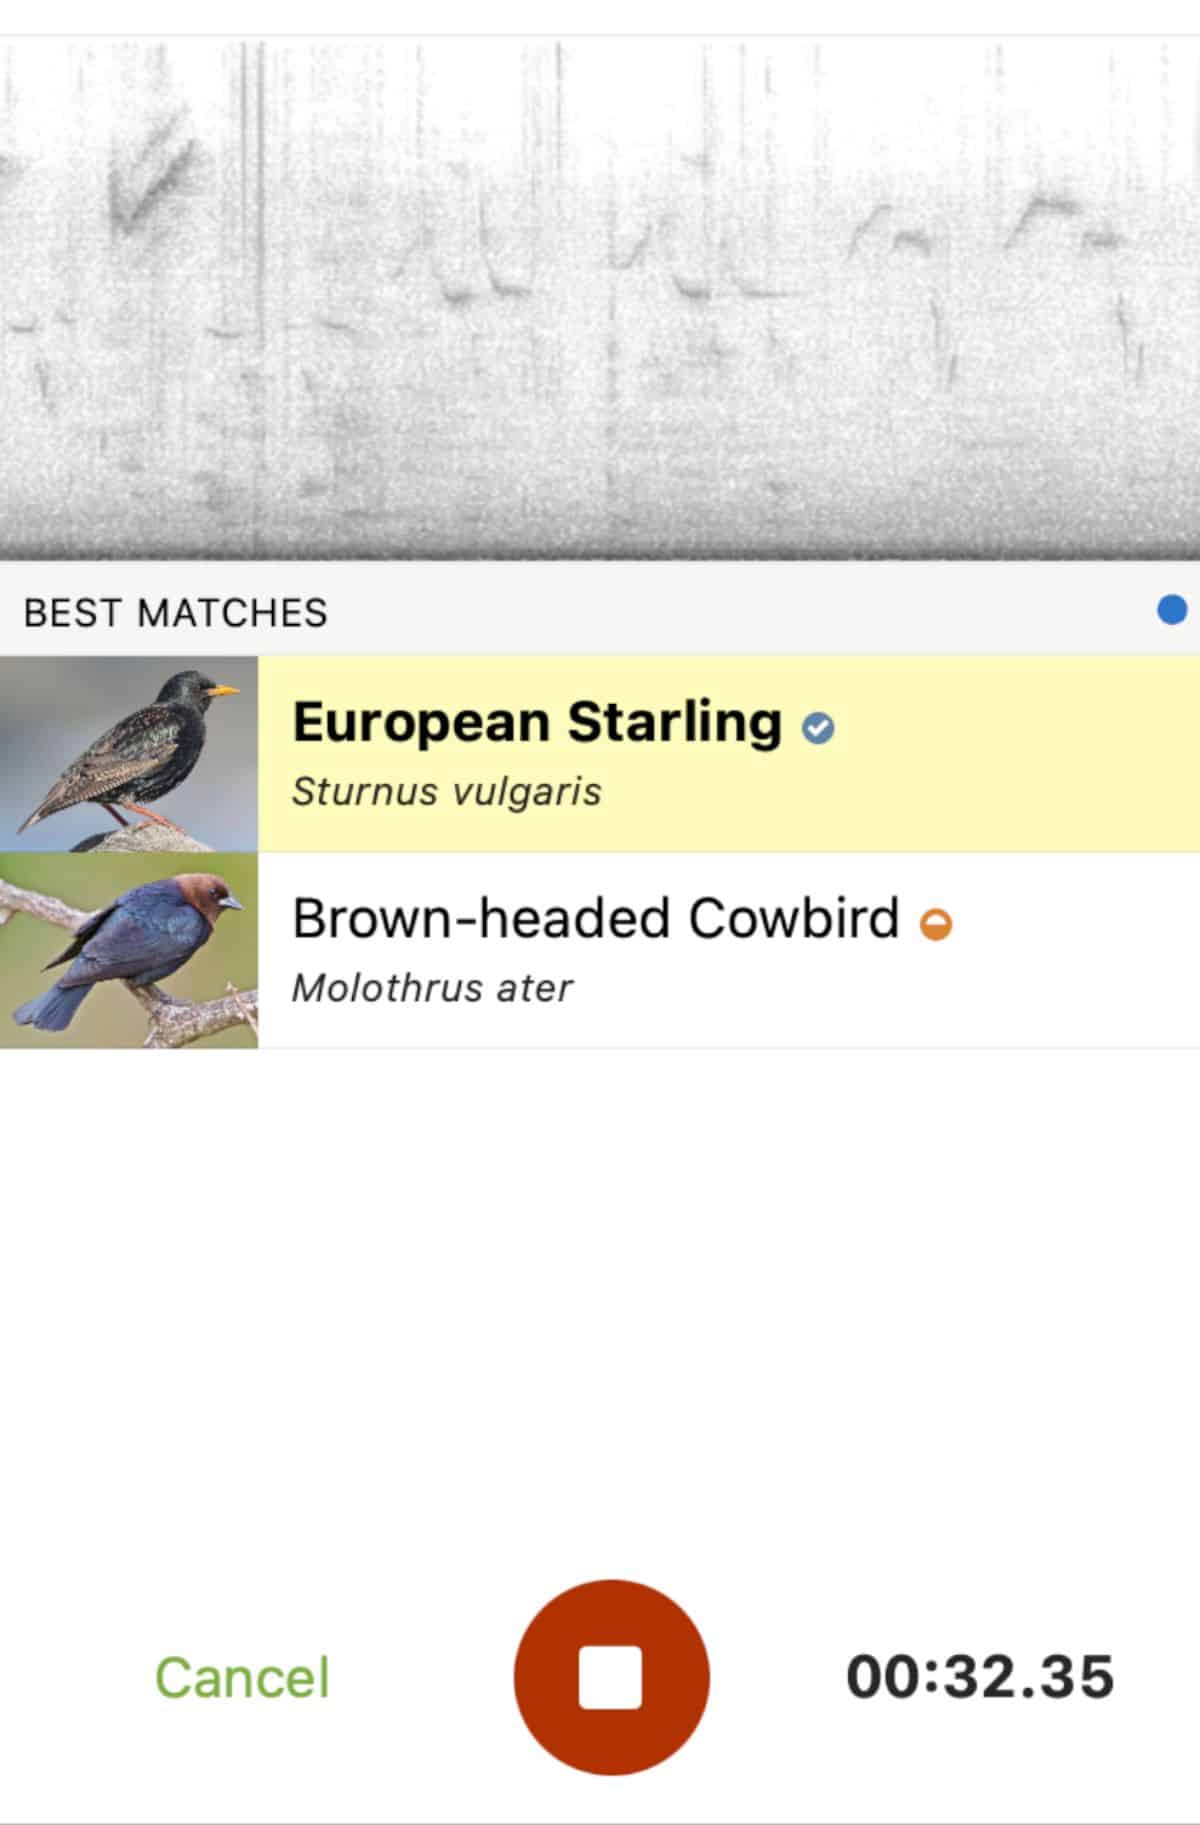 Showing how mimicking birds can confuse the app